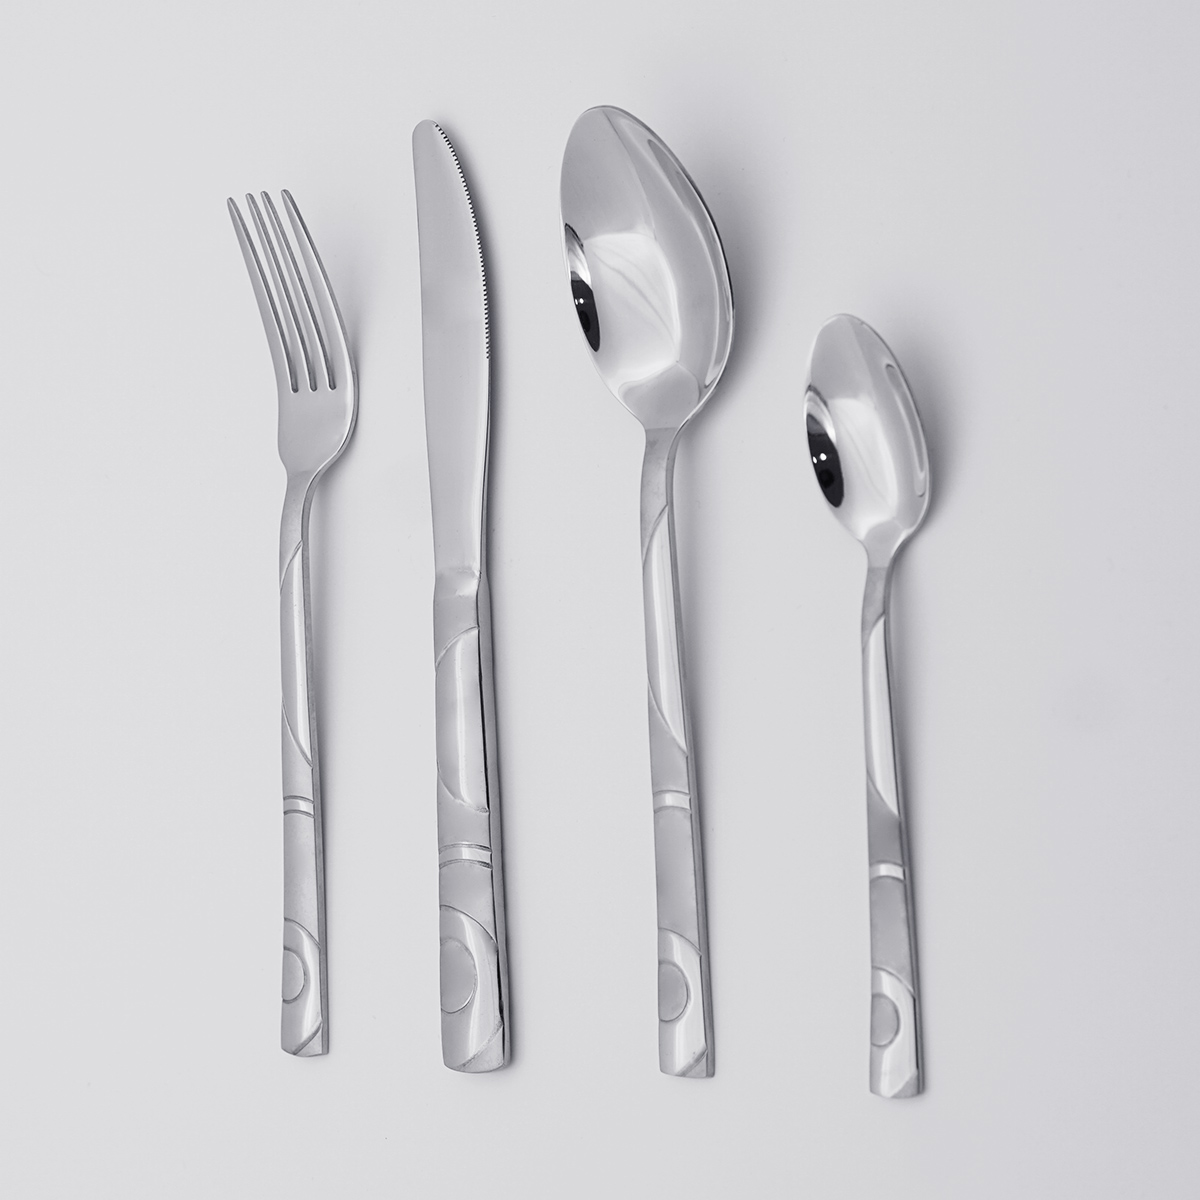 Hot Sell Creative Cutlery 304 Stainless Steel Silverware Flatware Sets for Restaurant